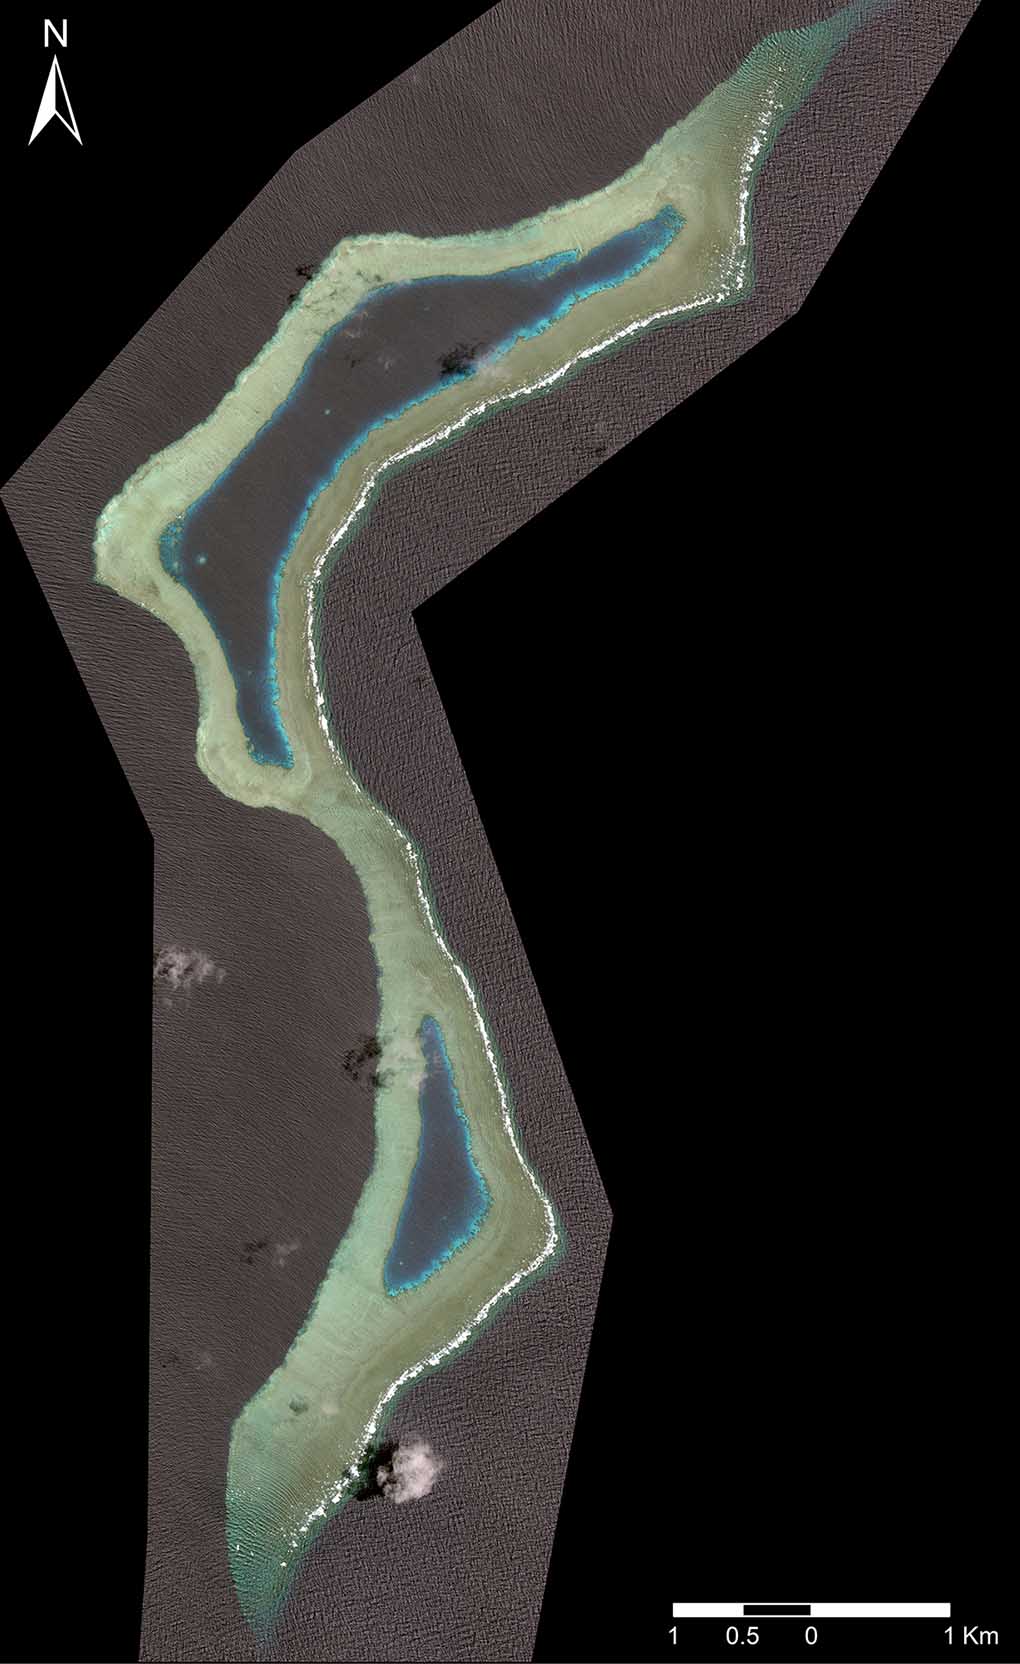 Satellite image of Boot Reef, showing the unique ‘boot’ shape for which it is named, its two narrow lagoons, and the ‘isthmus’ that separates them. Image: Google Maps.